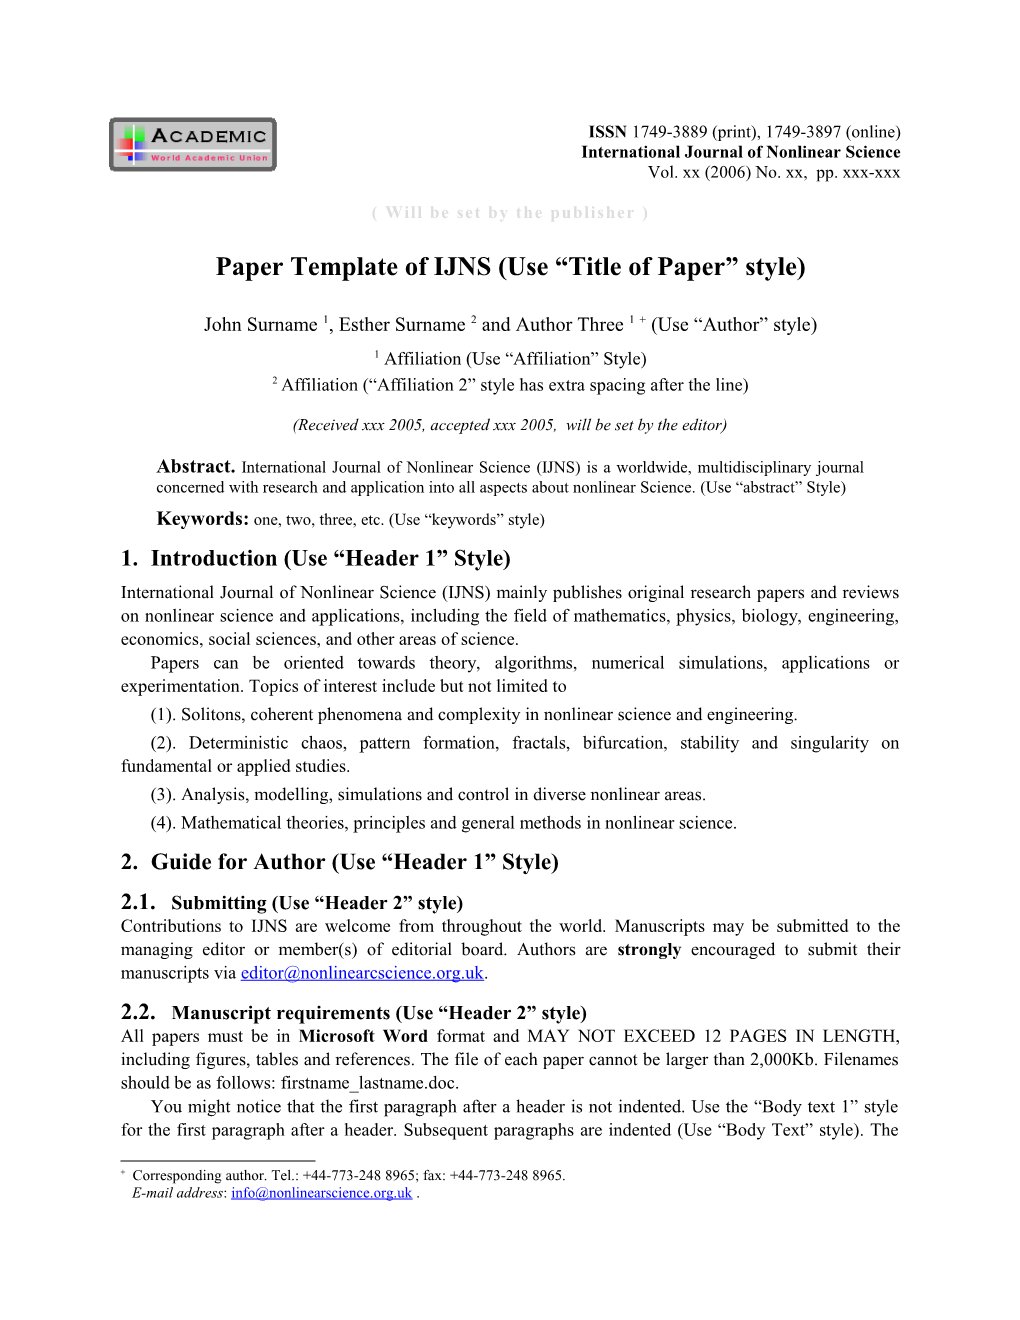 Paper Template of WJMS (Use Title of Paper Style)